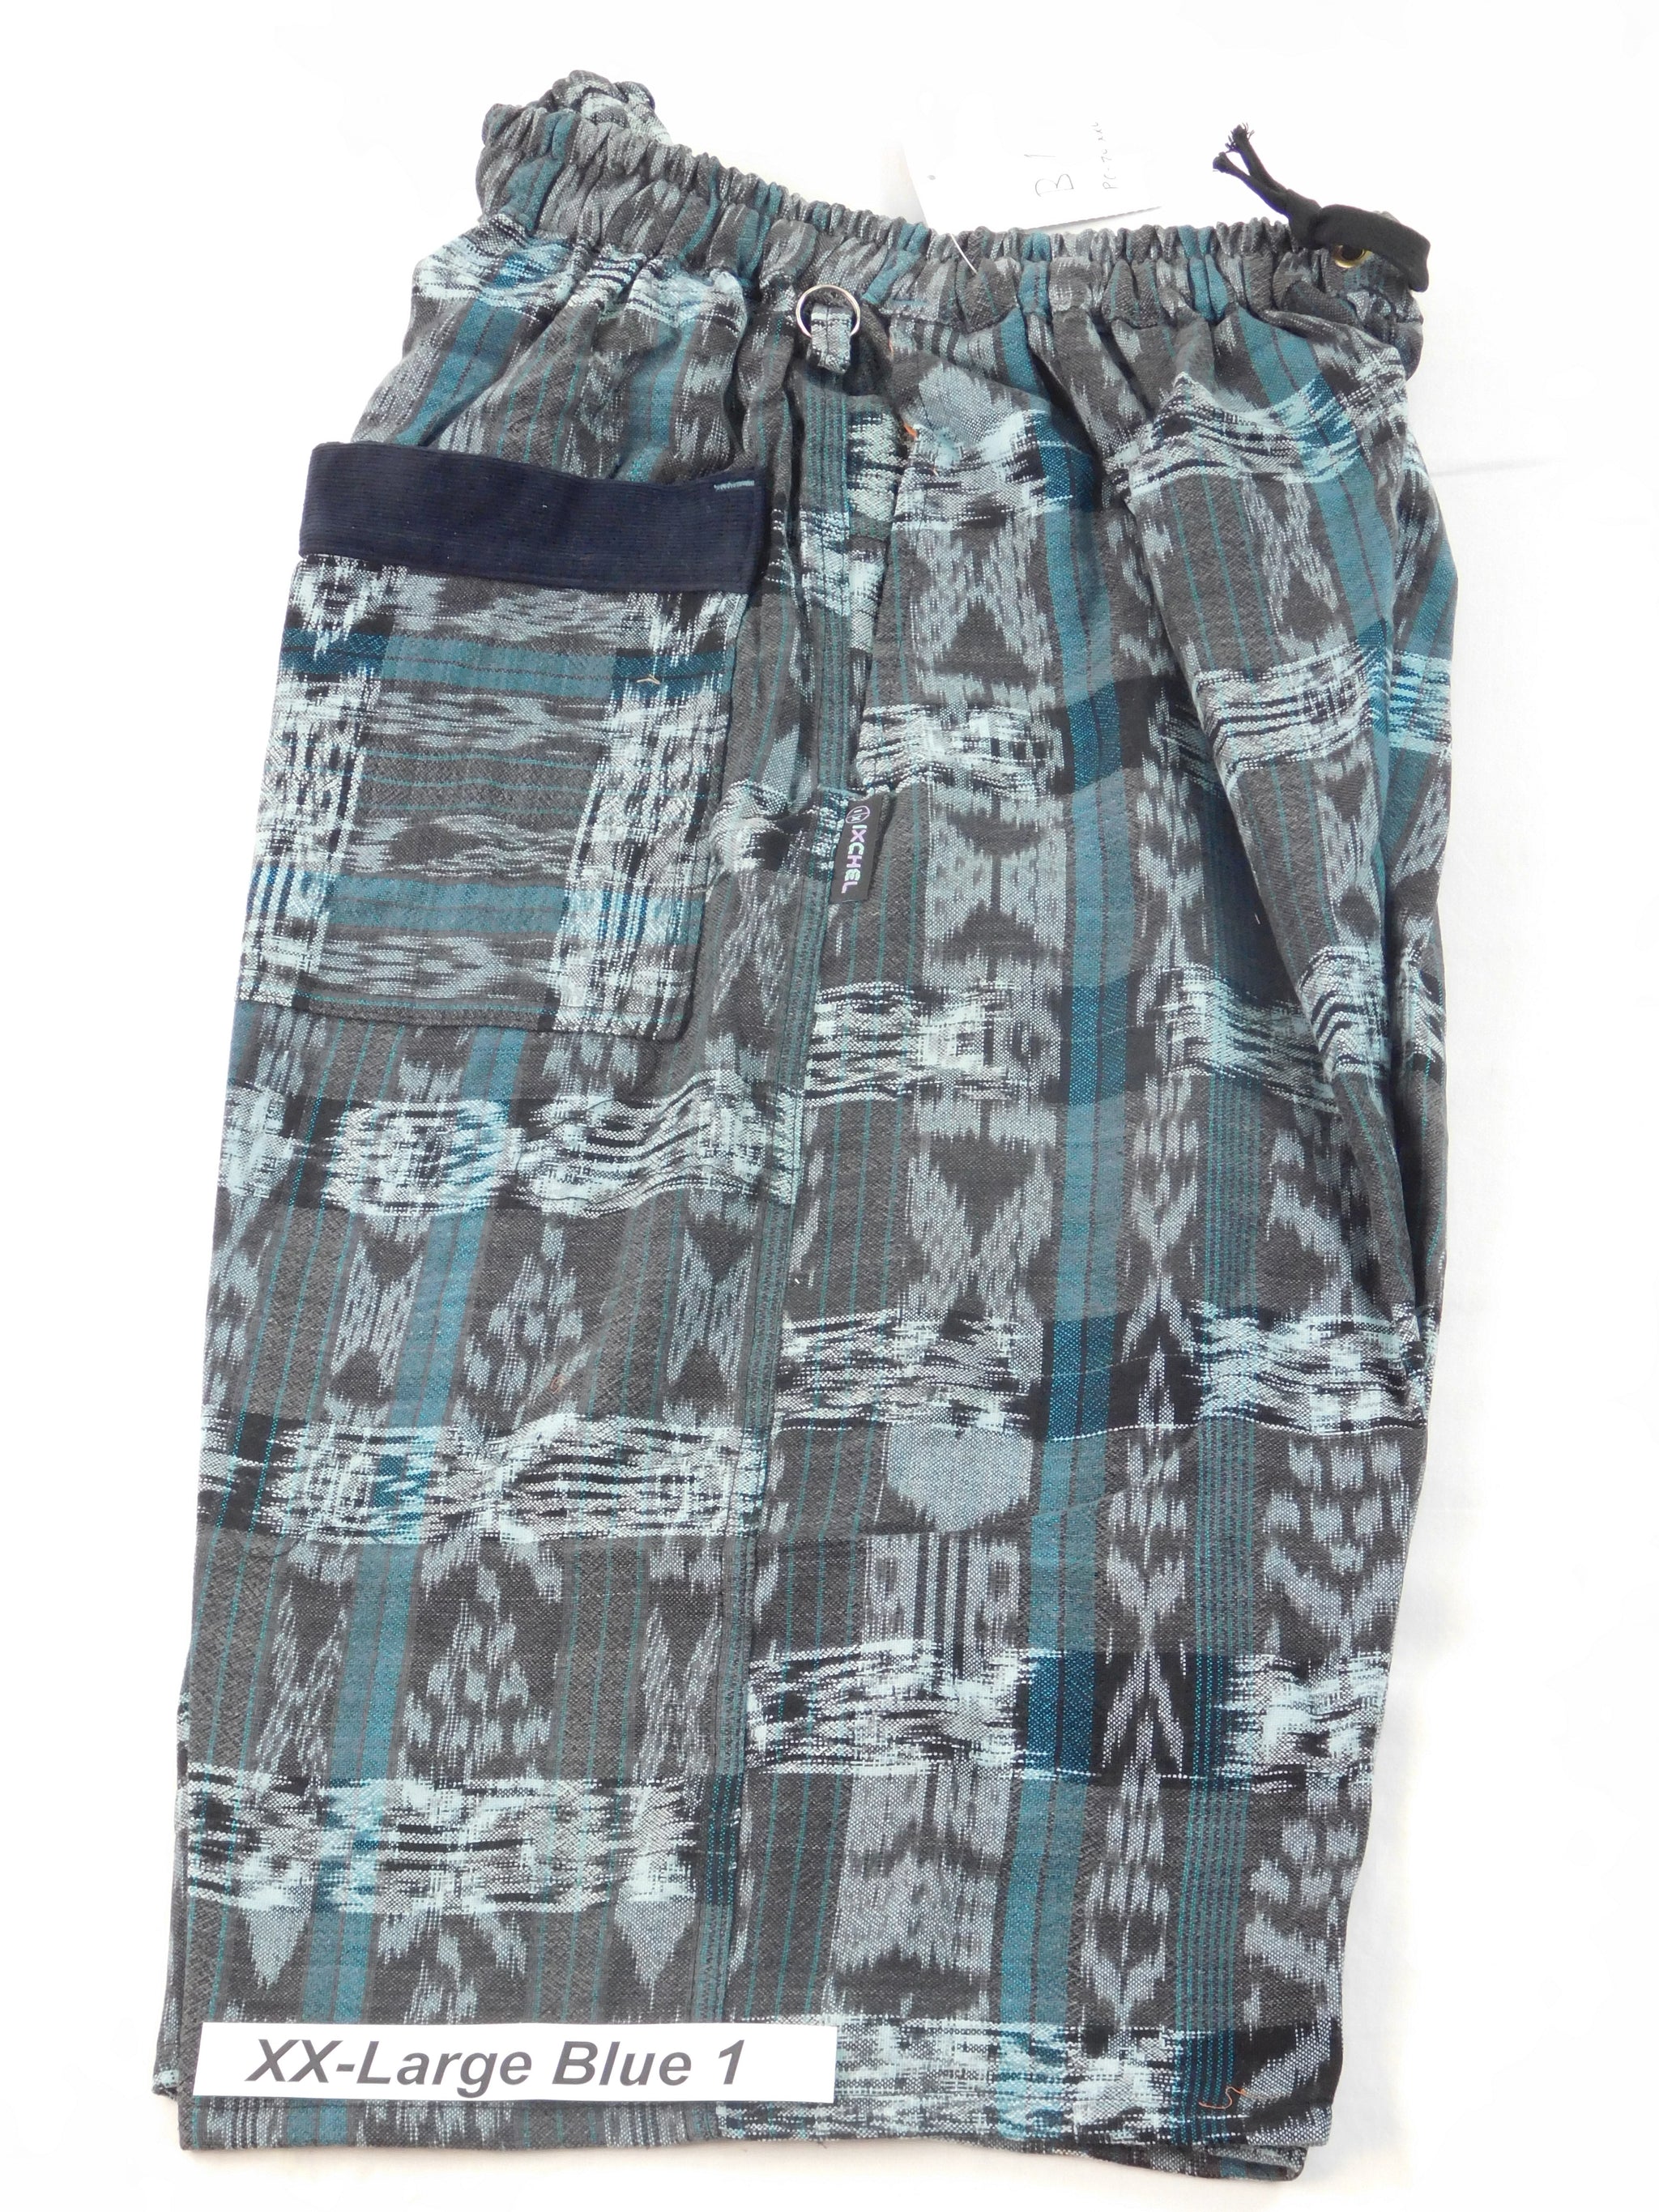 Hand Woven Shorts in Cotton Ikat-Just Restocked!